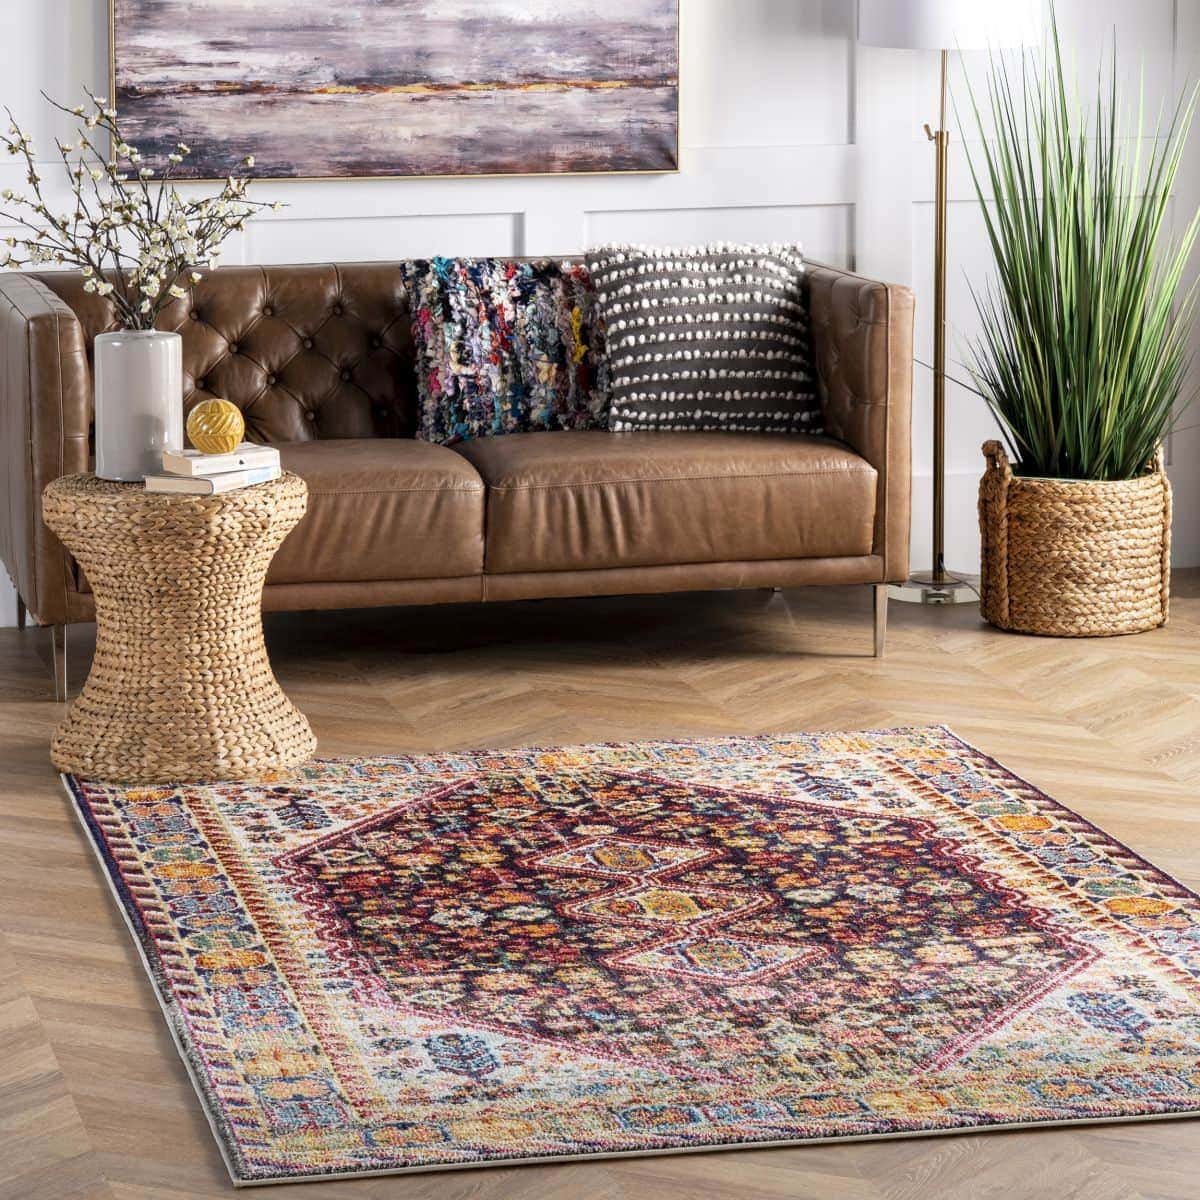 25 Gorgeous Rugs That Go With Brown Couches, Area Rugs That Go With Brown Leather Furniture